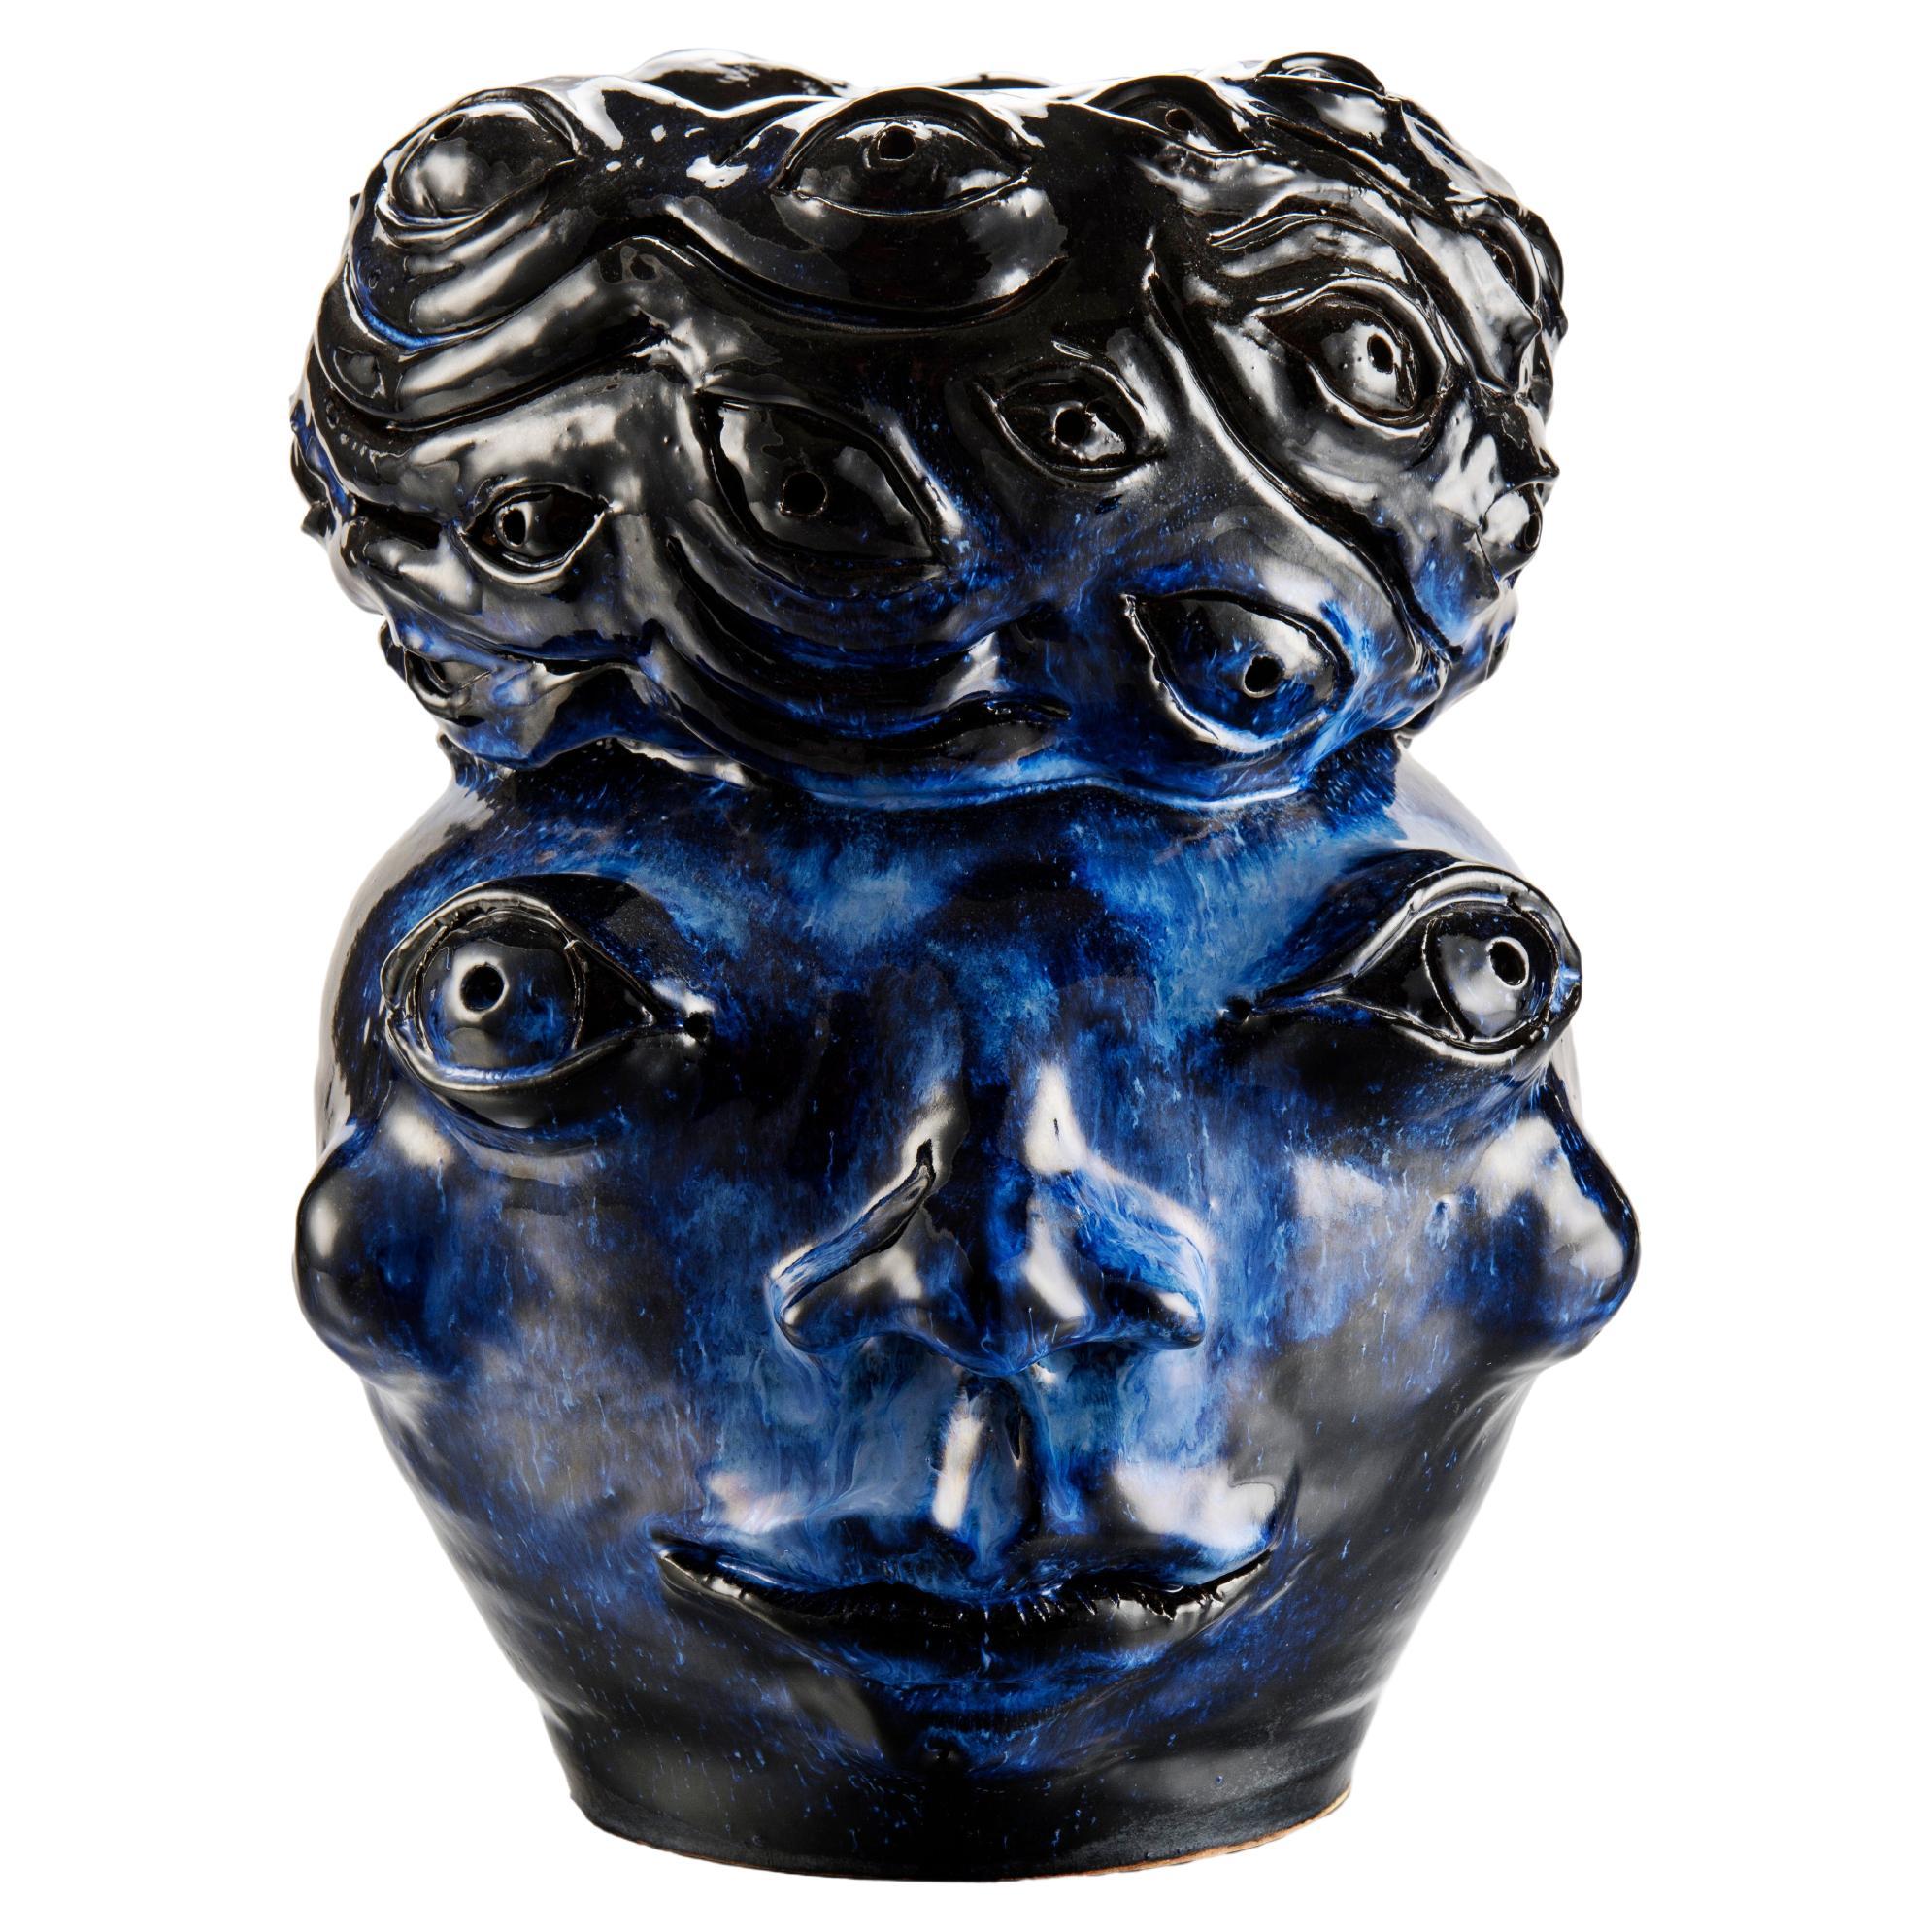 Freaklab Vase Made Entirely by Hand in Ceramic, Blue-Black Color